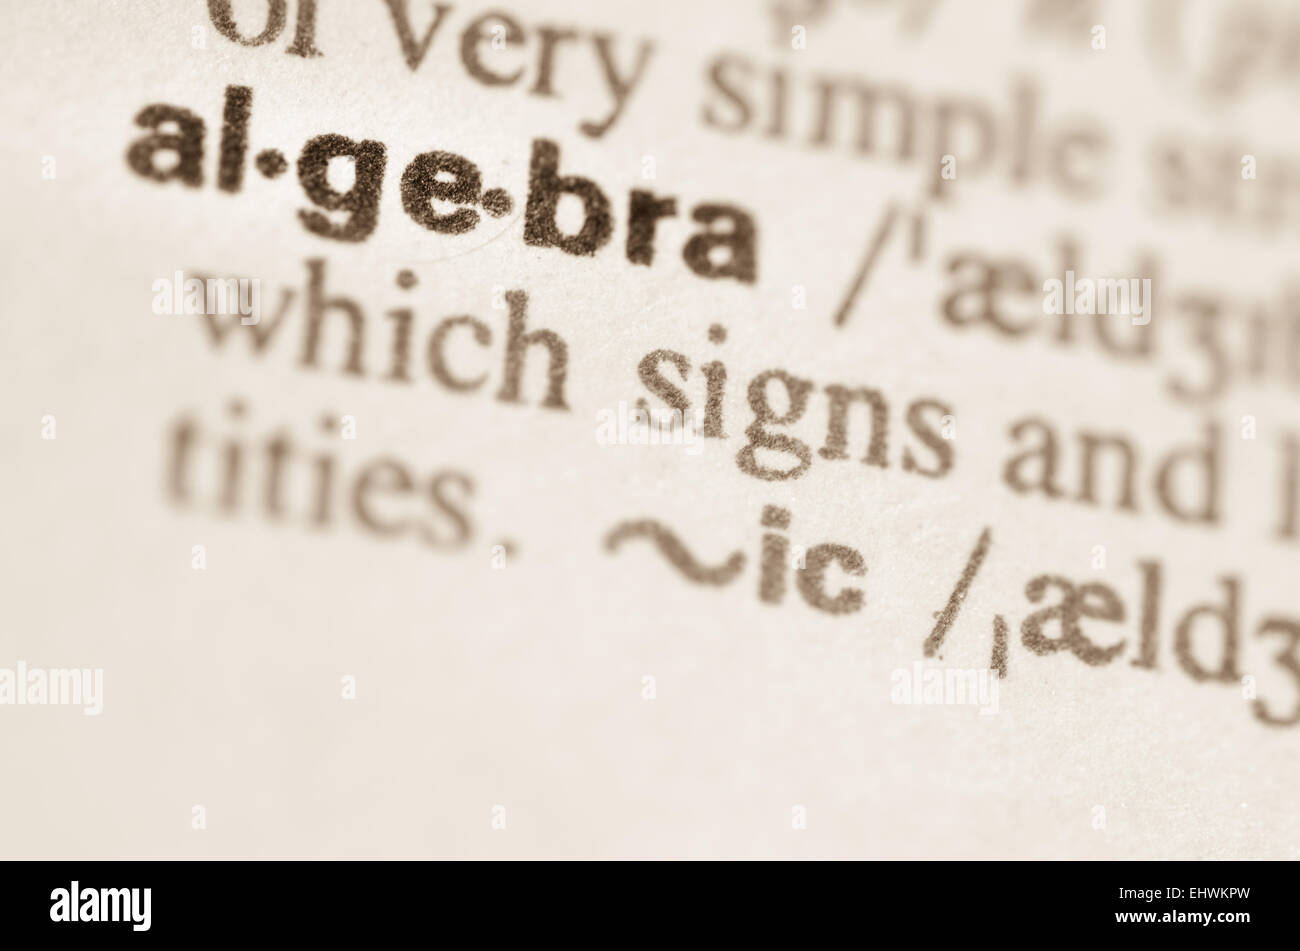 Definition of word algebra in dictionary Stock Photo